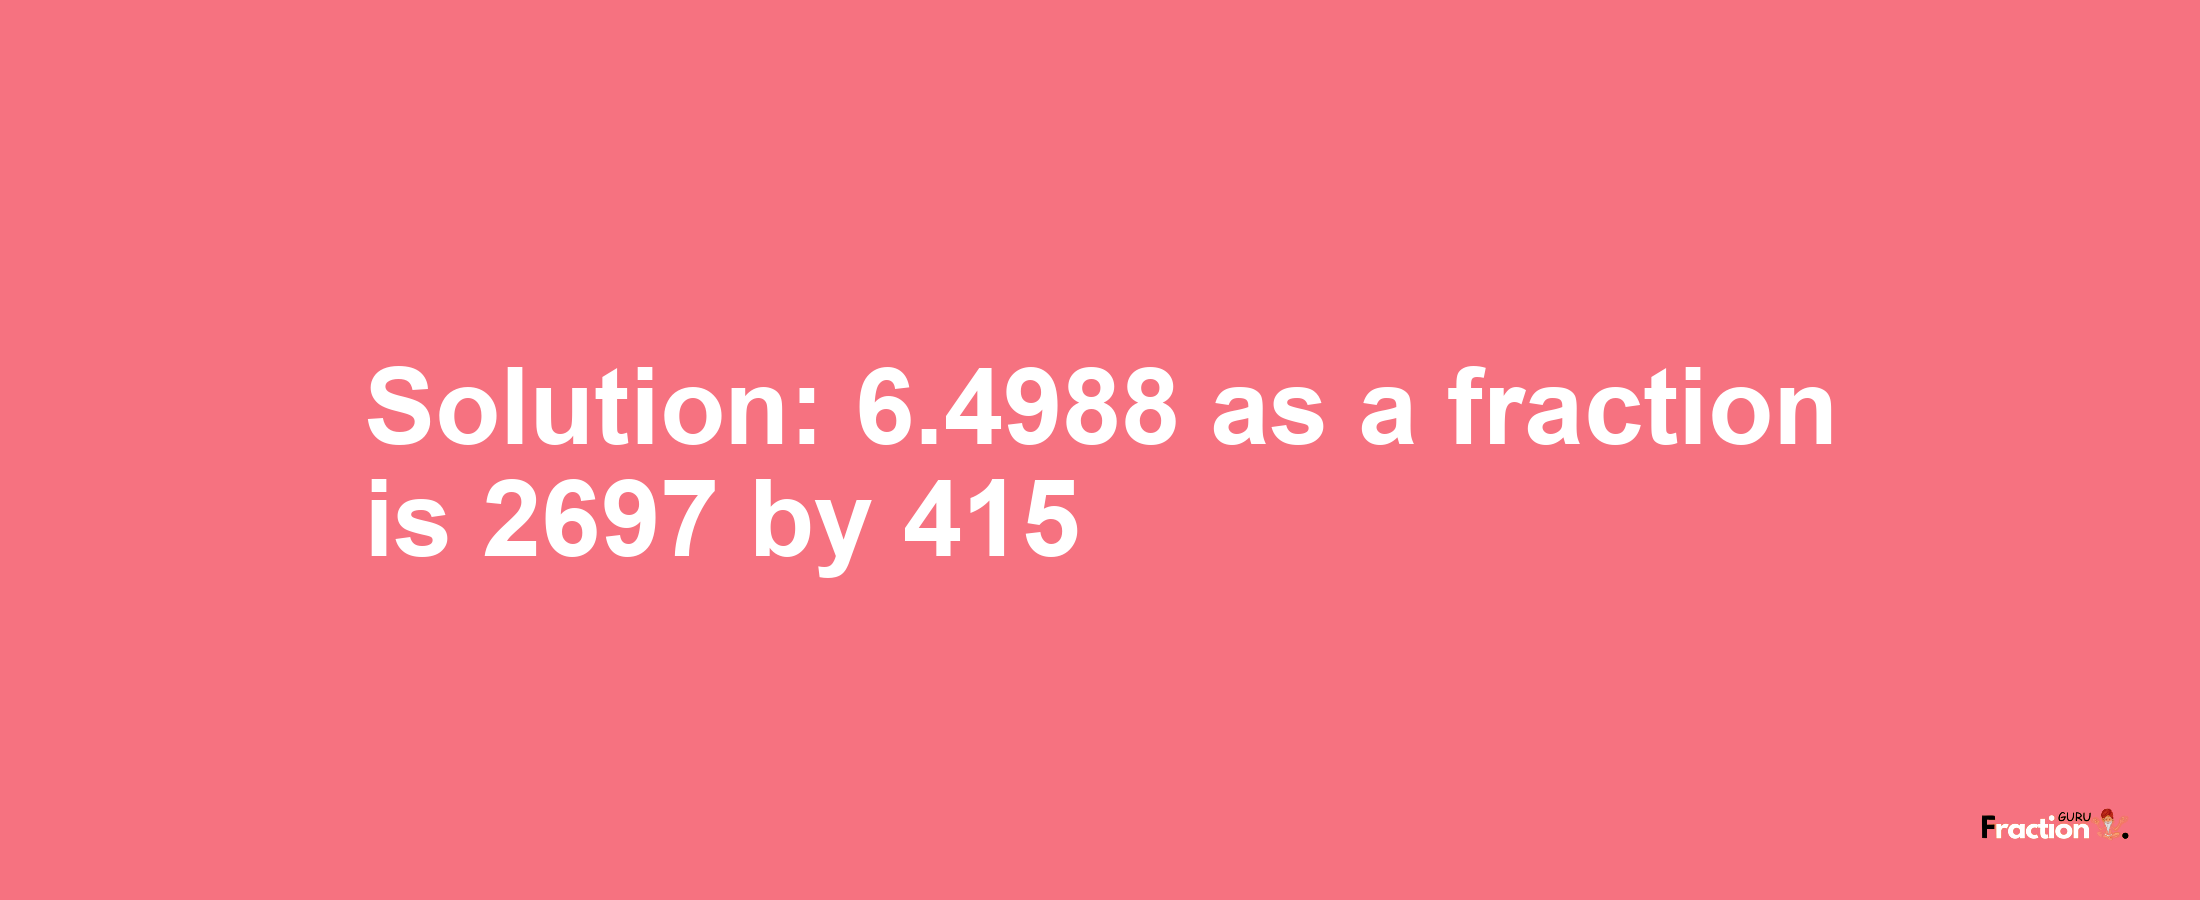 Solution:6.4988 as a fraction is 2697/415